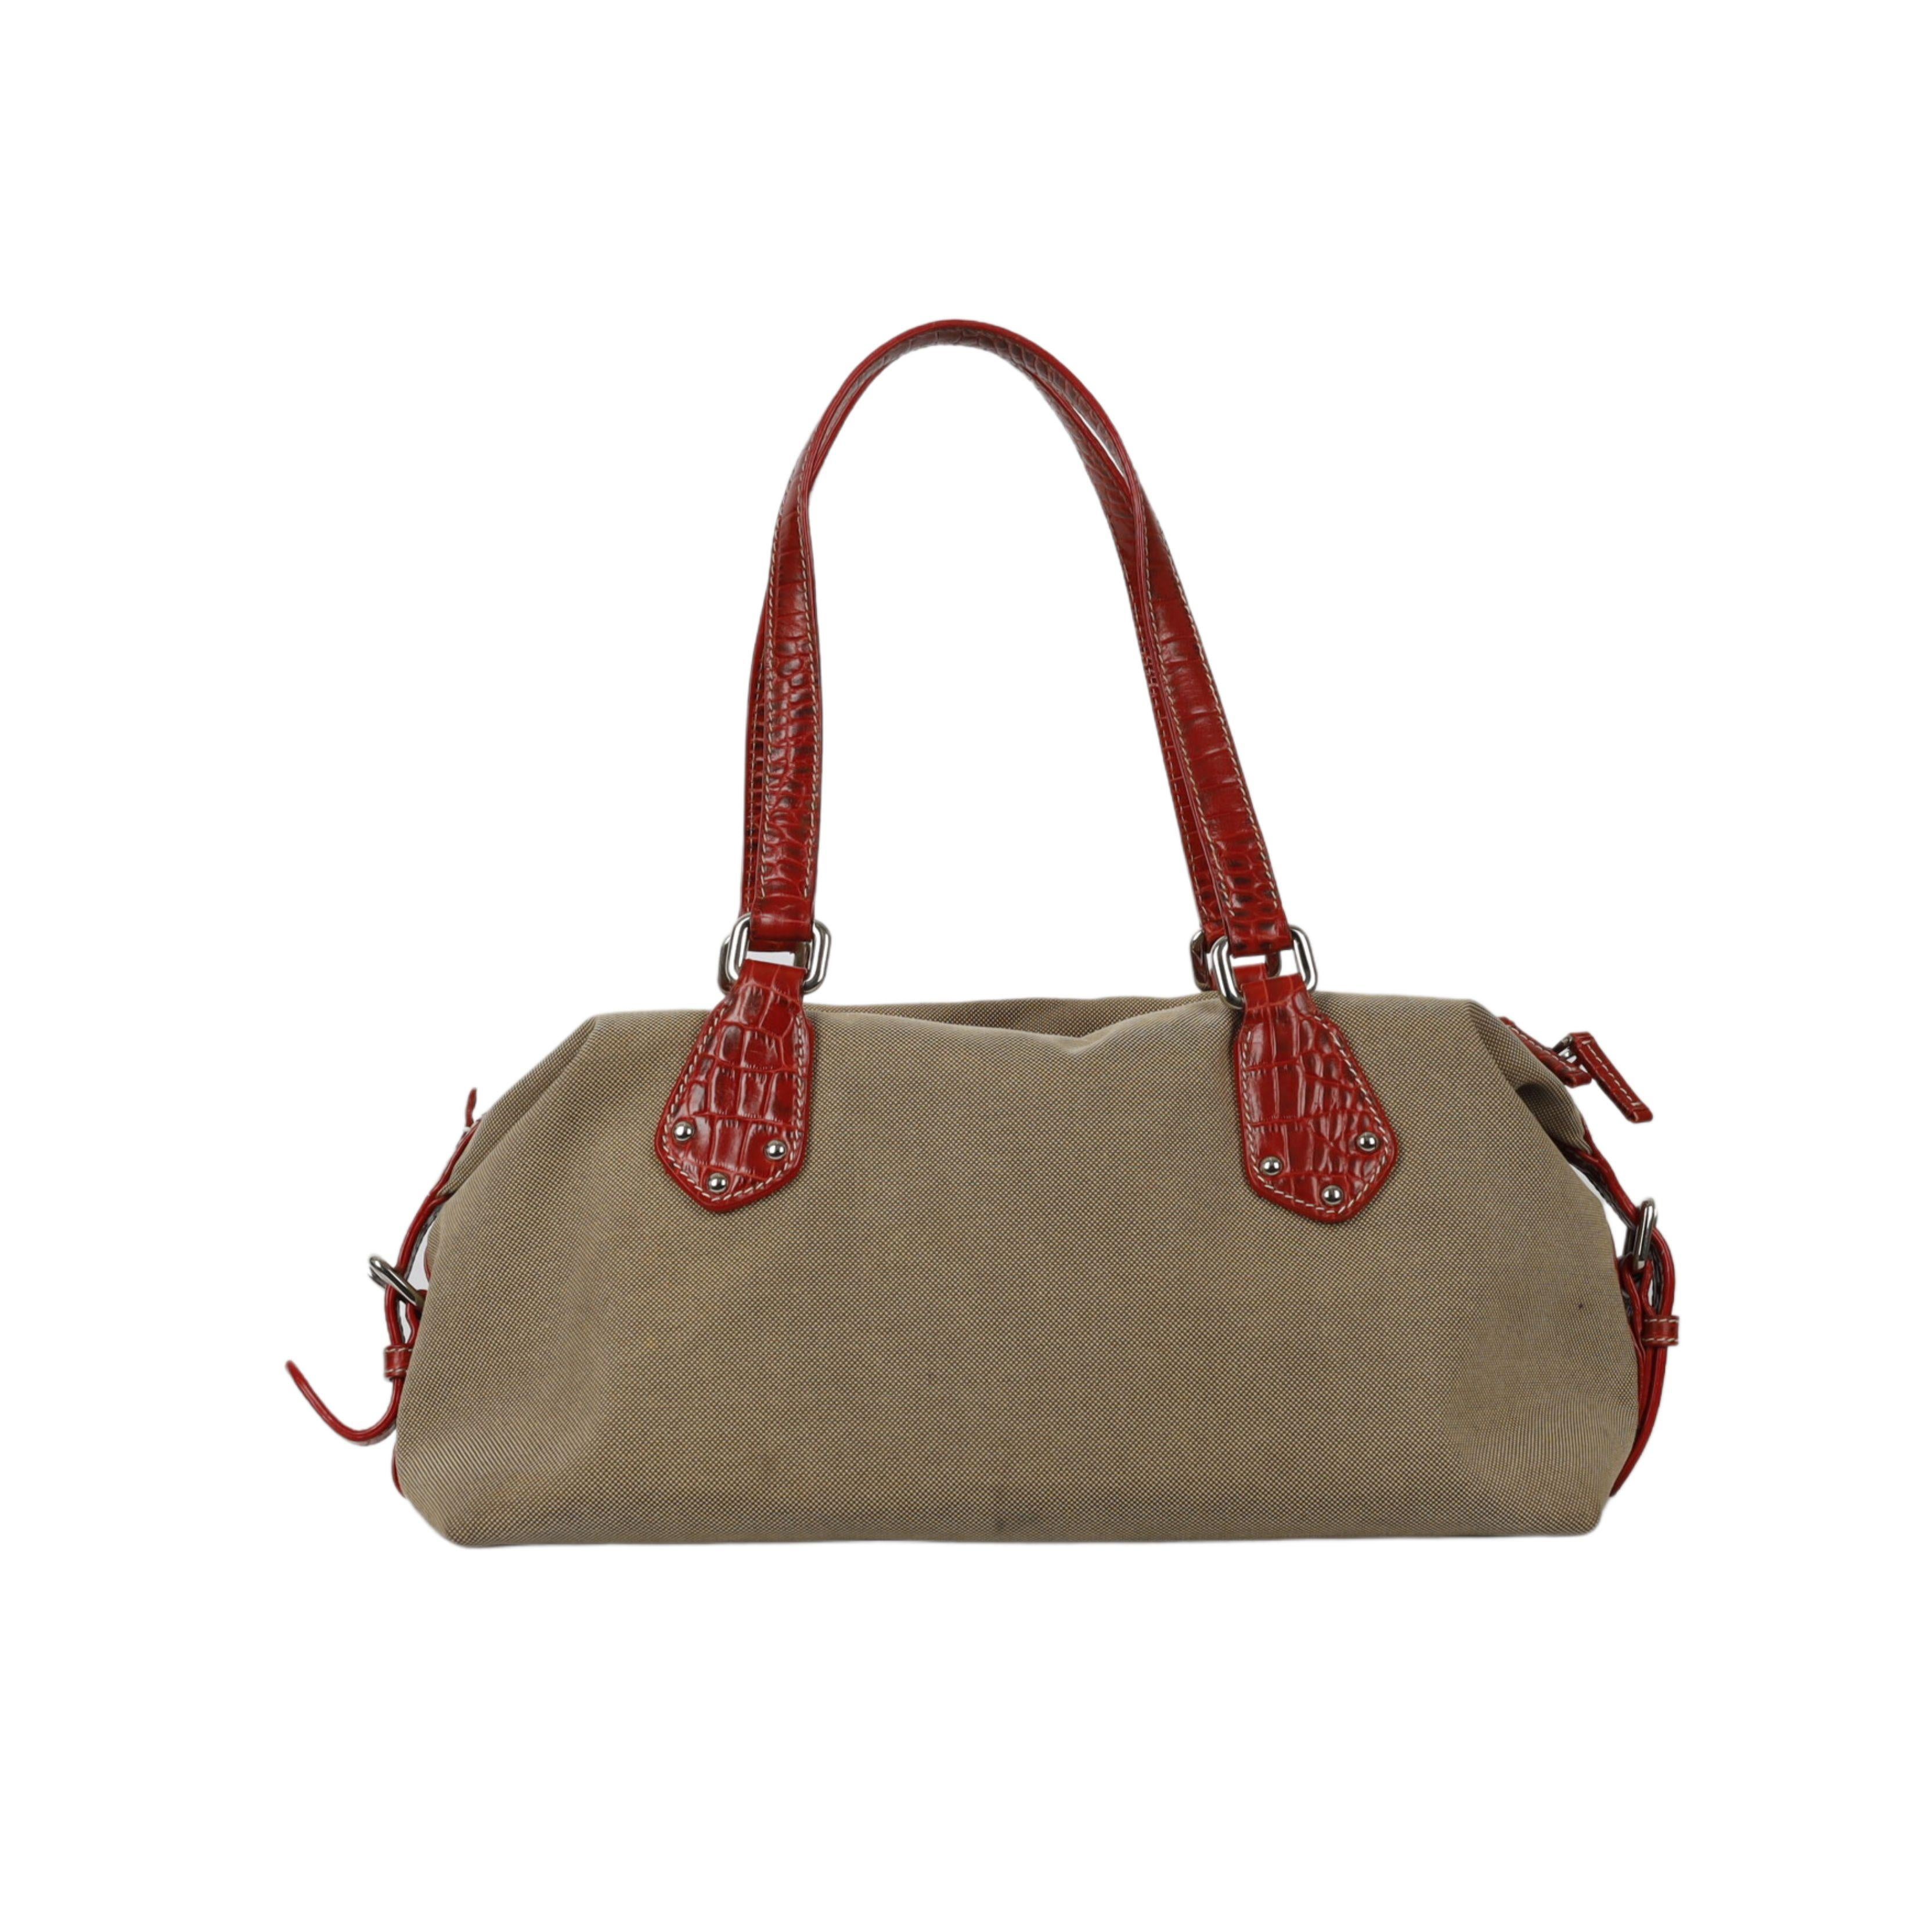 This luxe Jacquard Bowling Handbag from Prada exudes sophistication and style. Crafted with high-quality canvas in beige and exotic leather trims in red, it offers a classic silhouette along with two top handles. Inside, it provides plenty of space